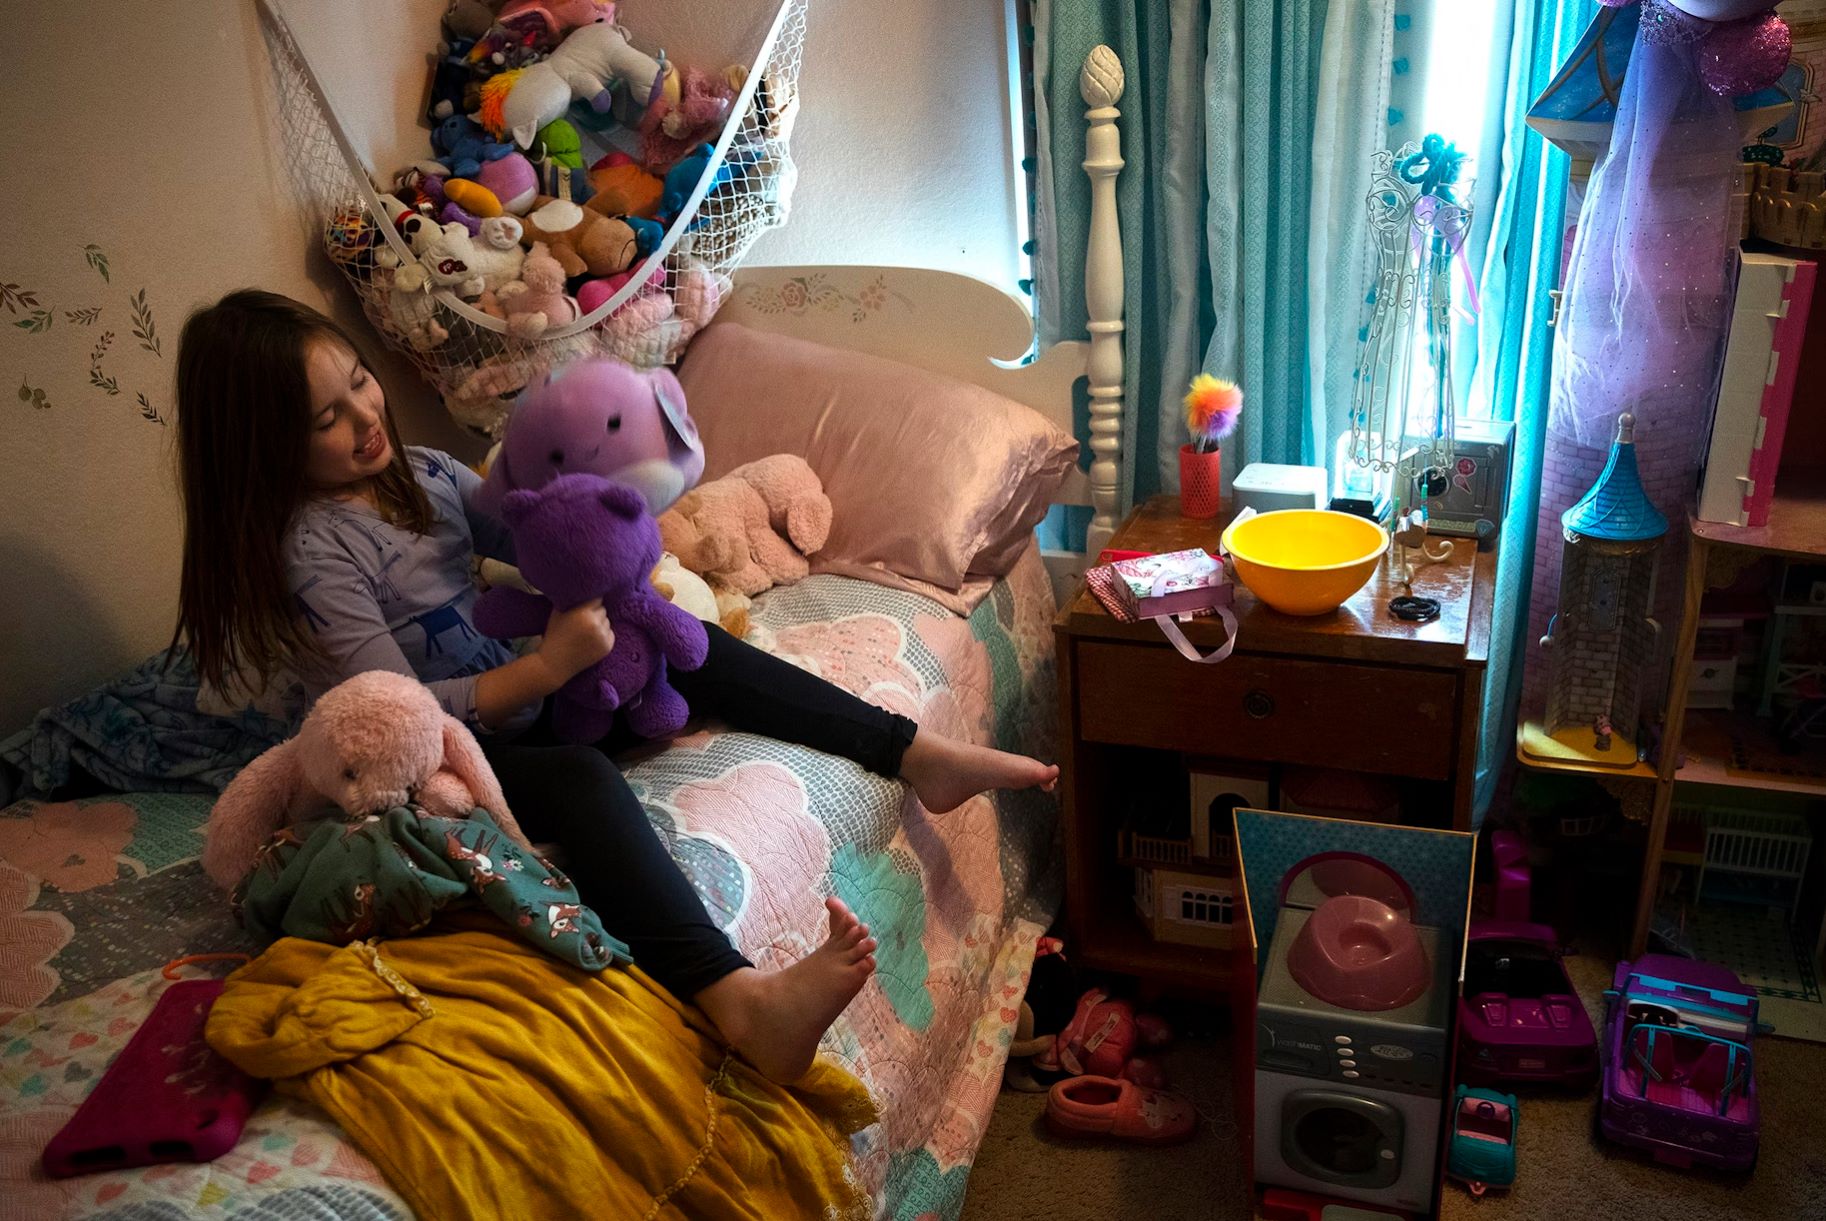 Lily Butler, 7, plays with stuffed animals in her bedroom after school on Wednesday, November 22, 2023, in Kenmore.